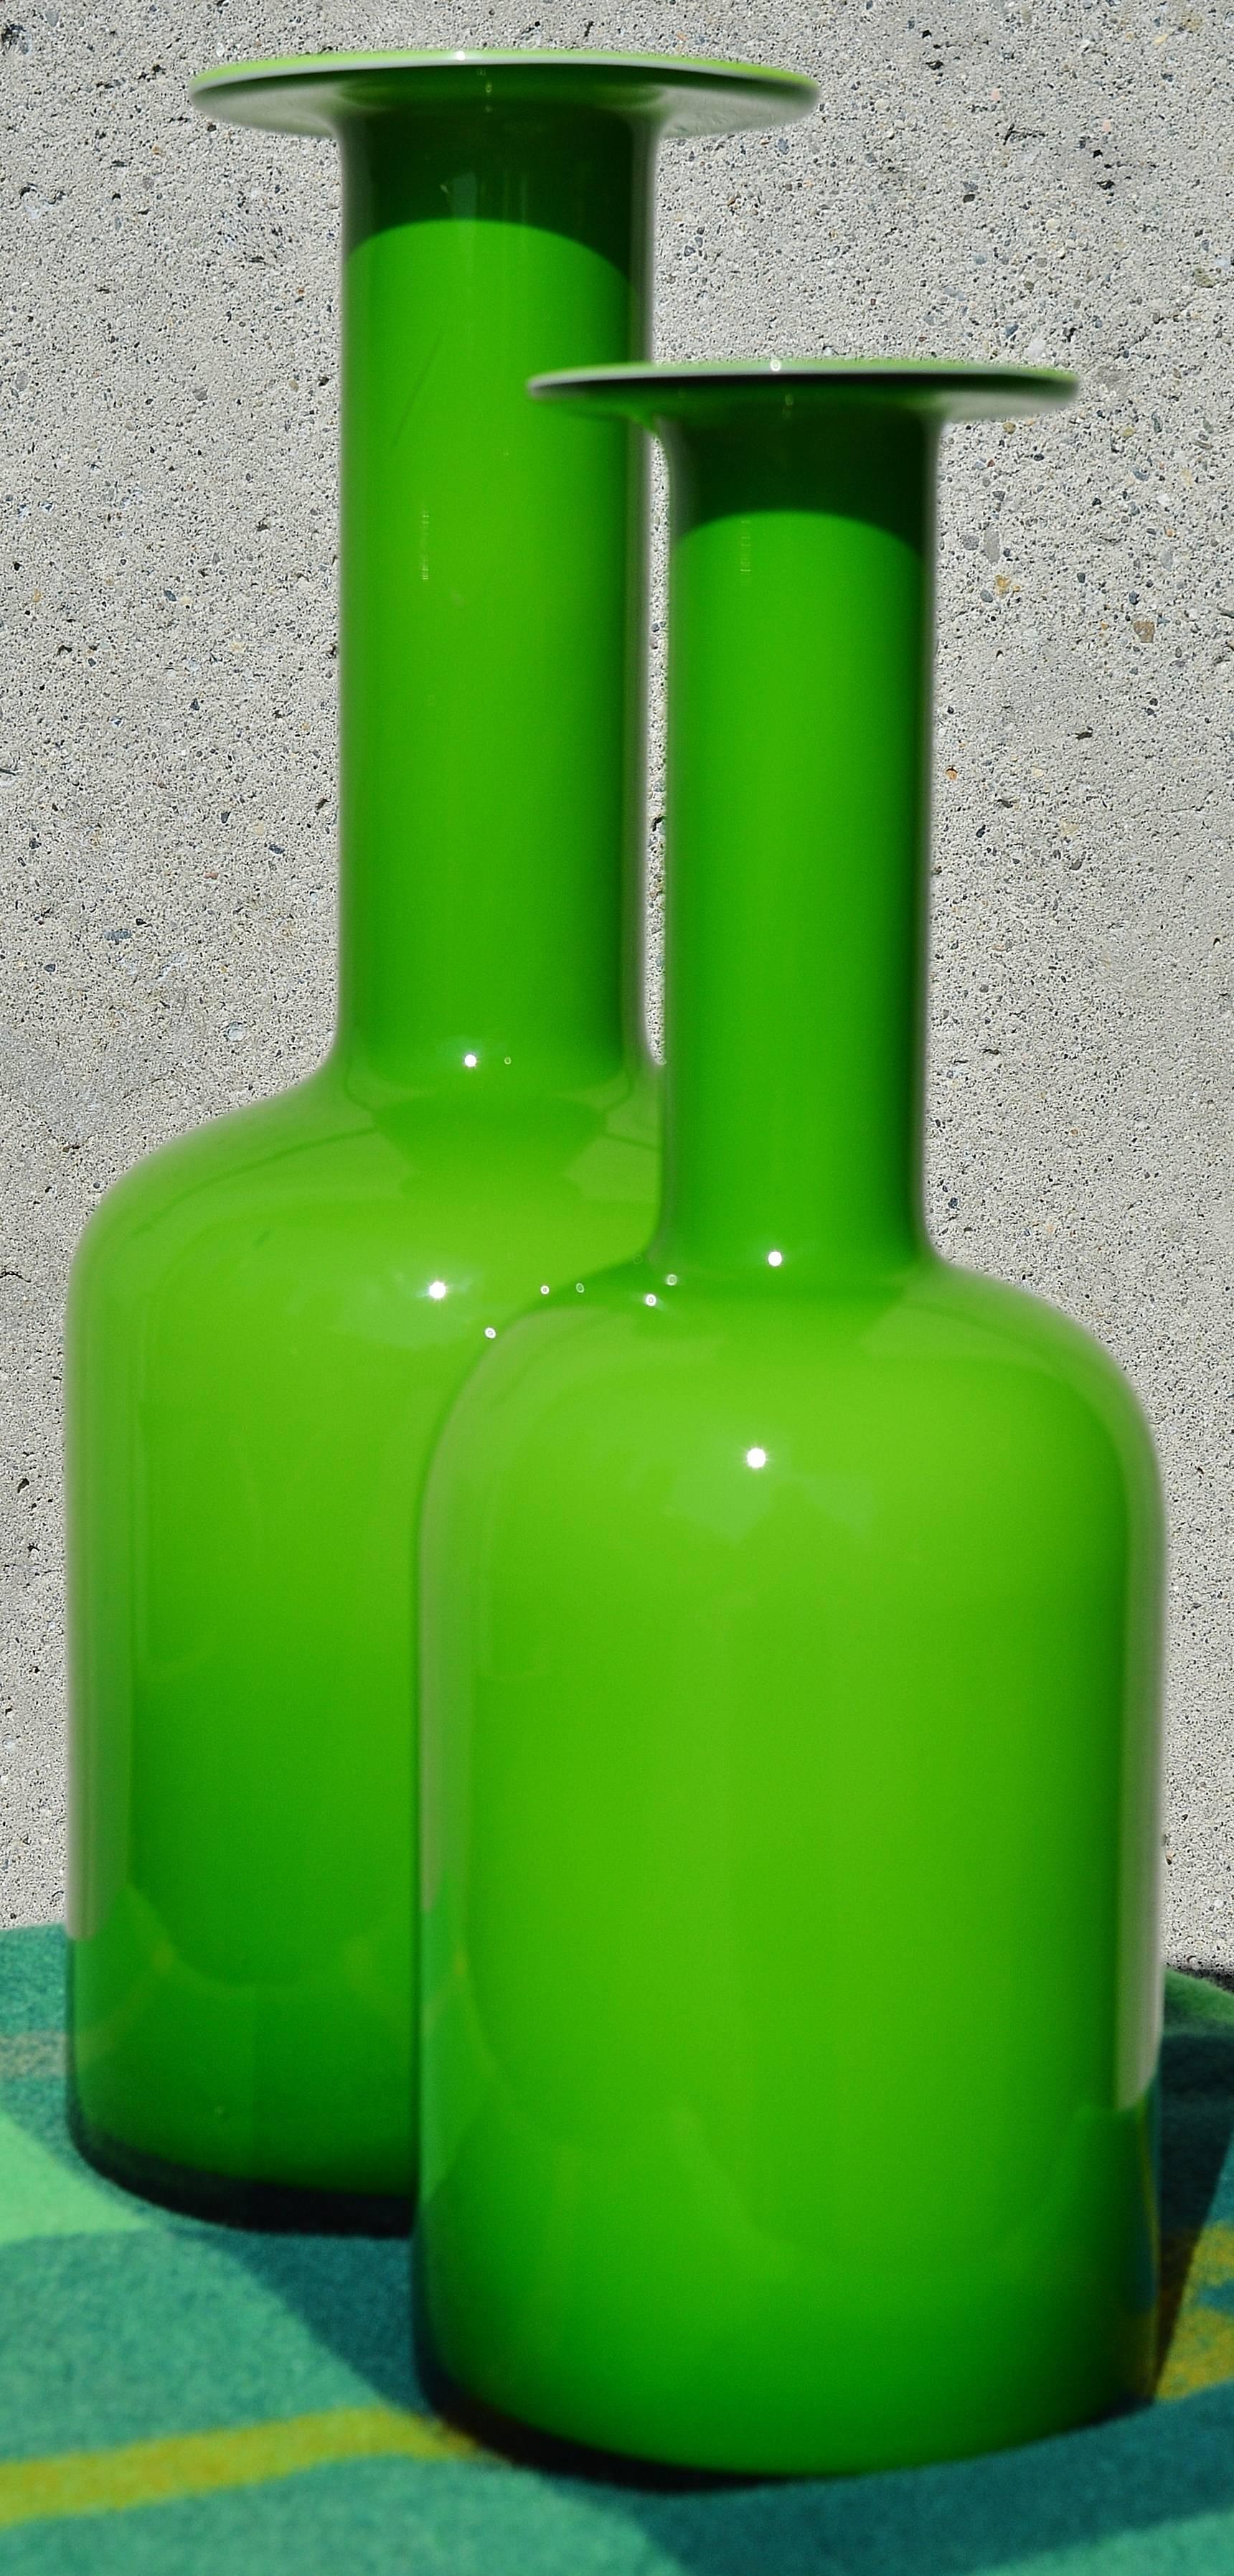 These iconic Danish Modern handblown art glass vases are in the most delicious shade of green that will be a gorgeous pop of color in your decor that will complement plants as well as nature. Designed by Otto Brauer for Holmegaard, they are in